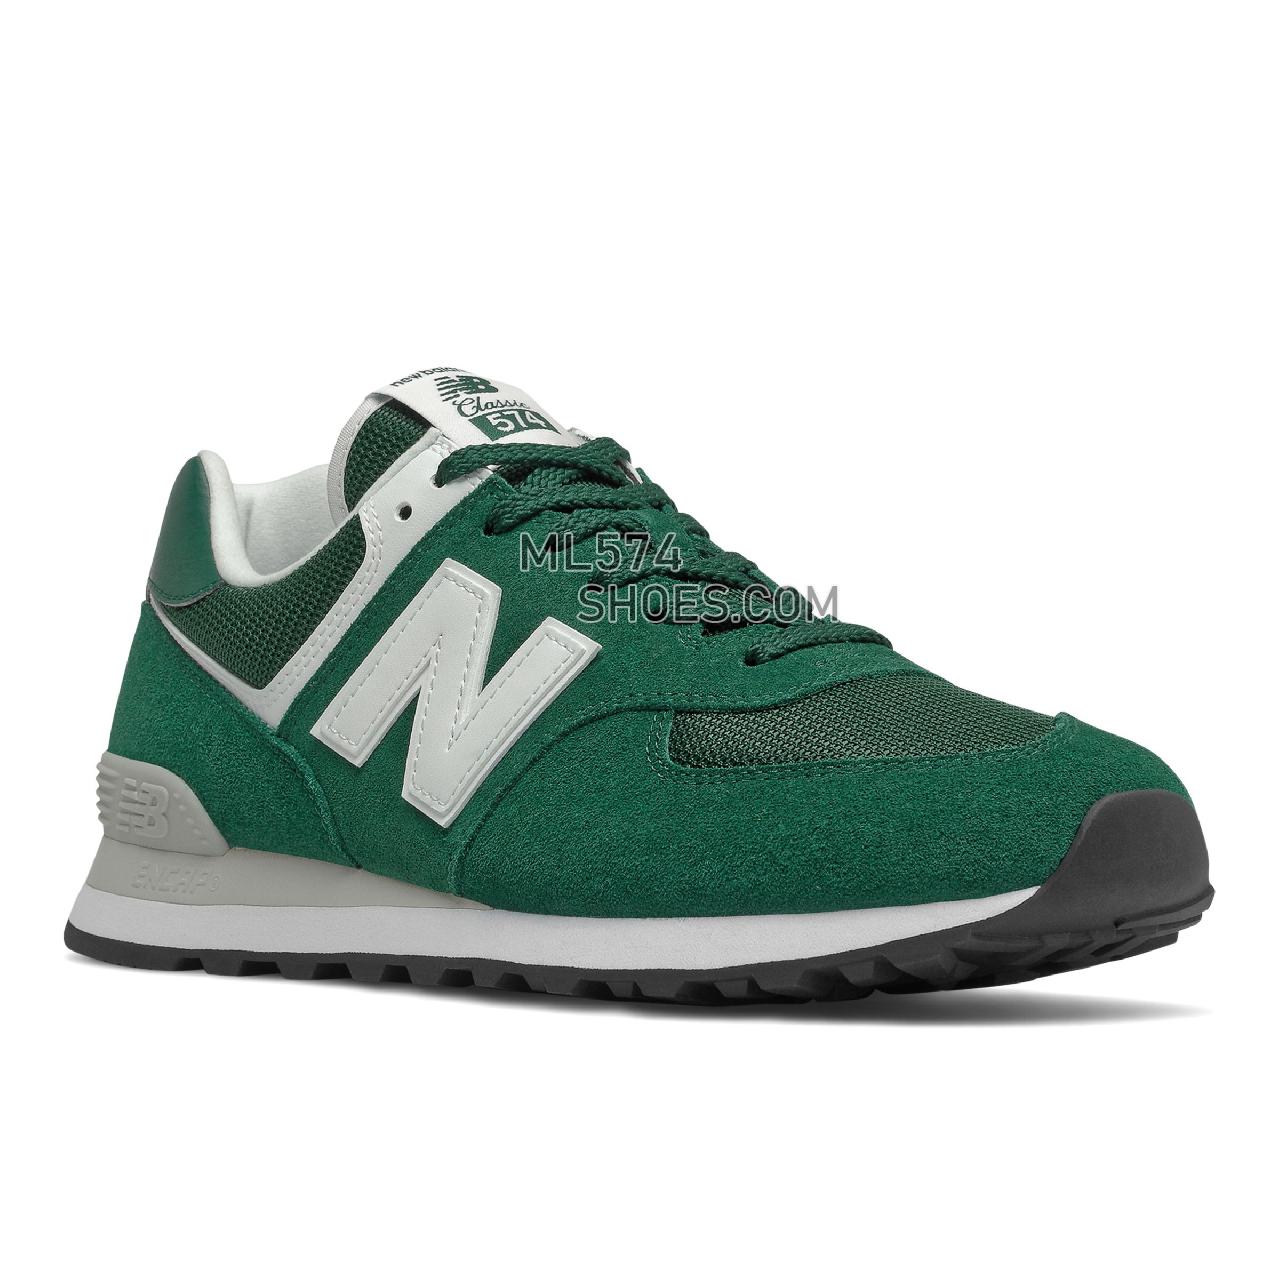 New Balance 574v2 - Unisex Men's Women's Classic Sneakers - Nightwatch Green with White - ML574RO2